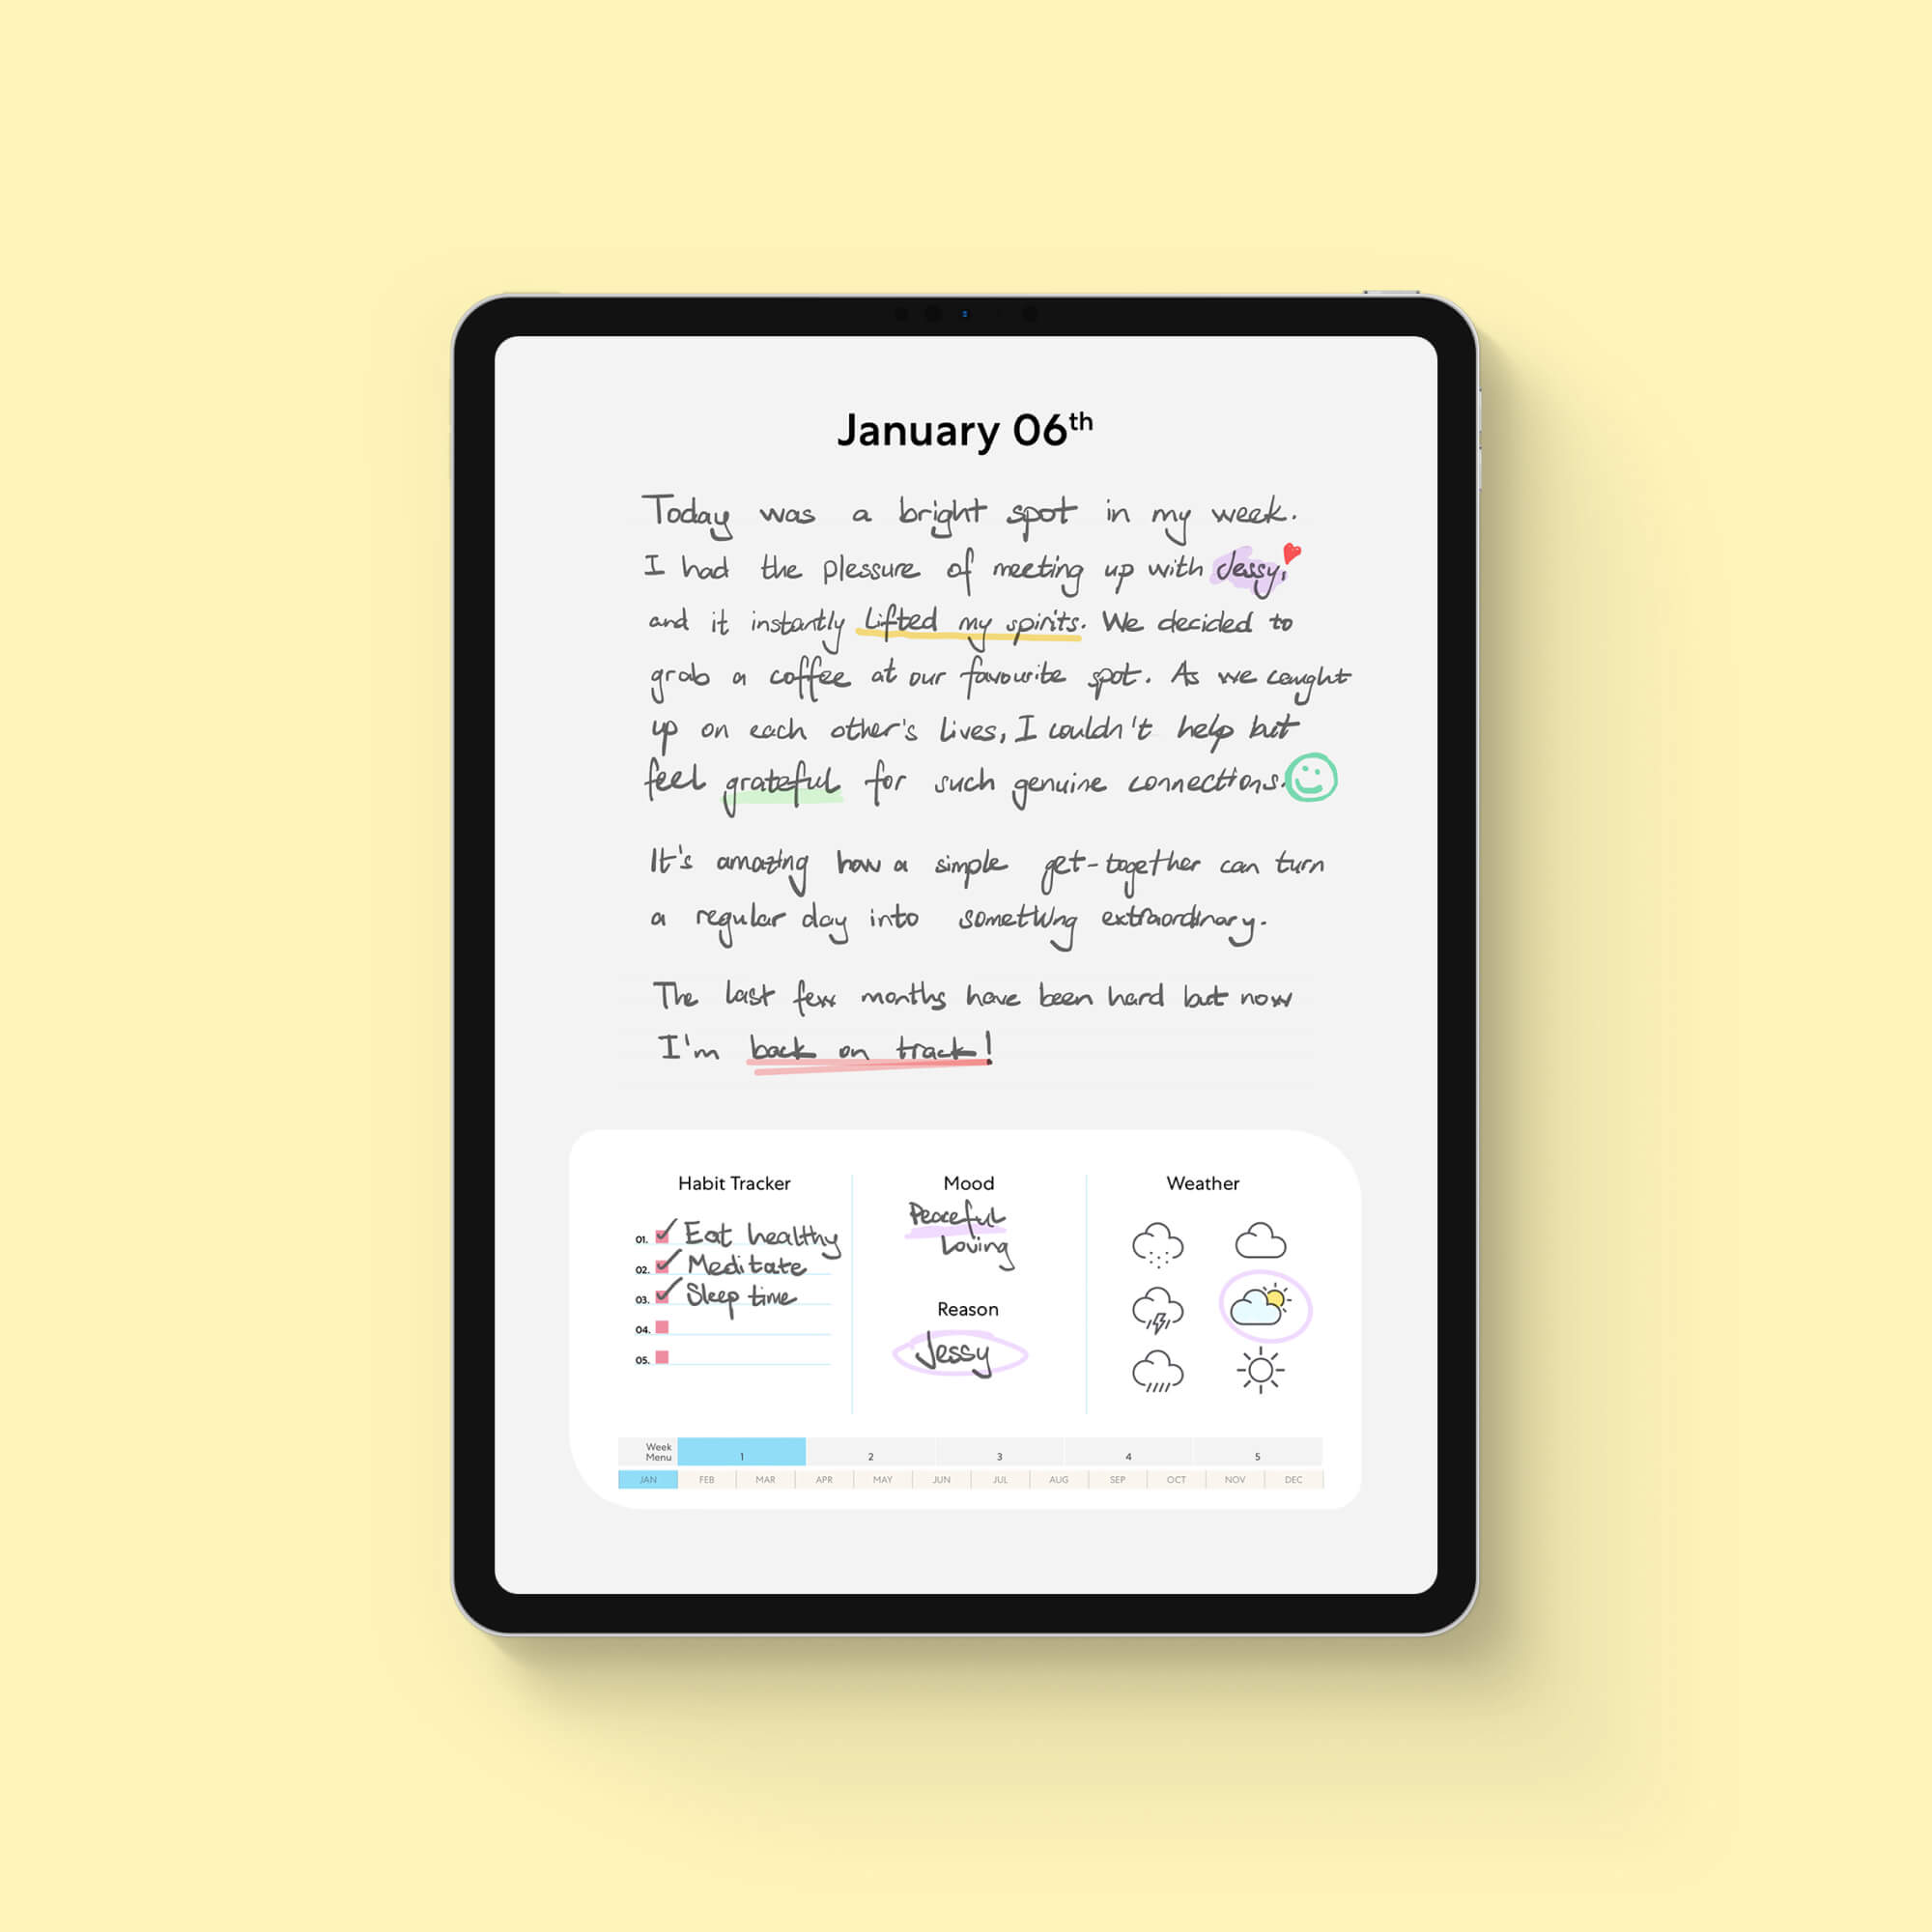 iPad with digital journal in light mode with January 6th on display